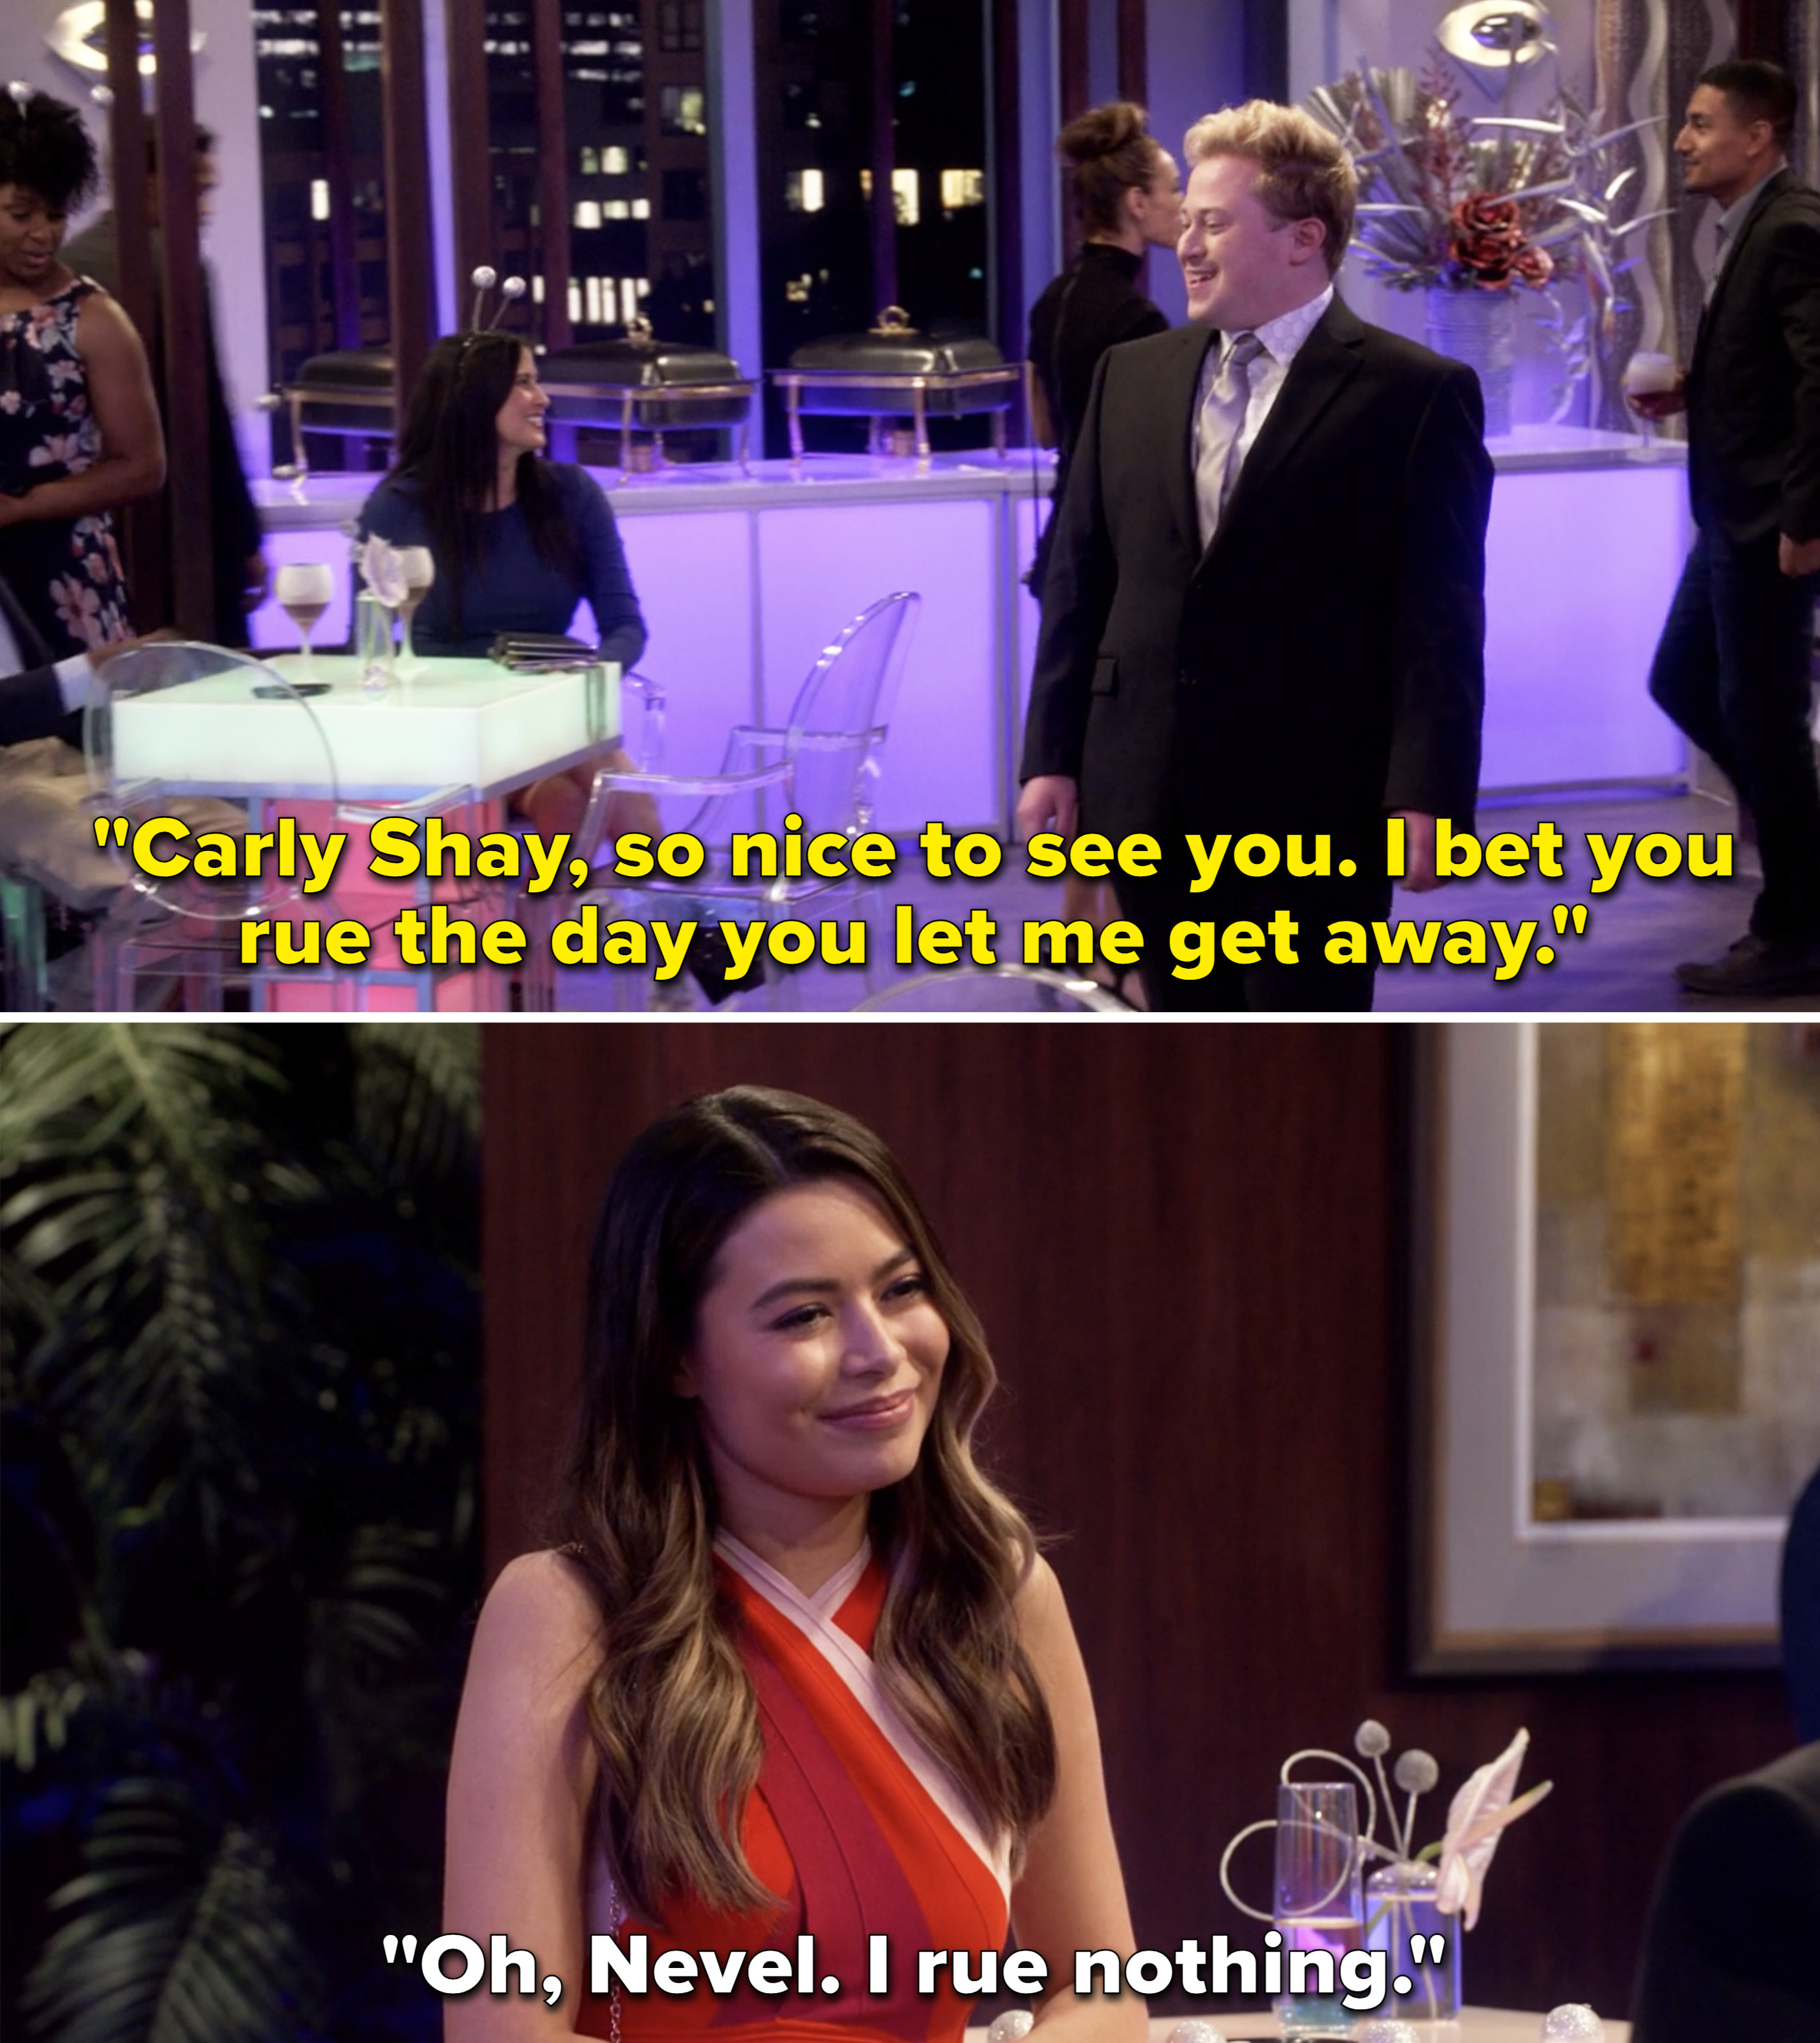 Nevel asking Carly if she &quot;rues the day you let me get away&quot; and Carly saying, &quot;Oh, Nevel. I rue nothing&quot;